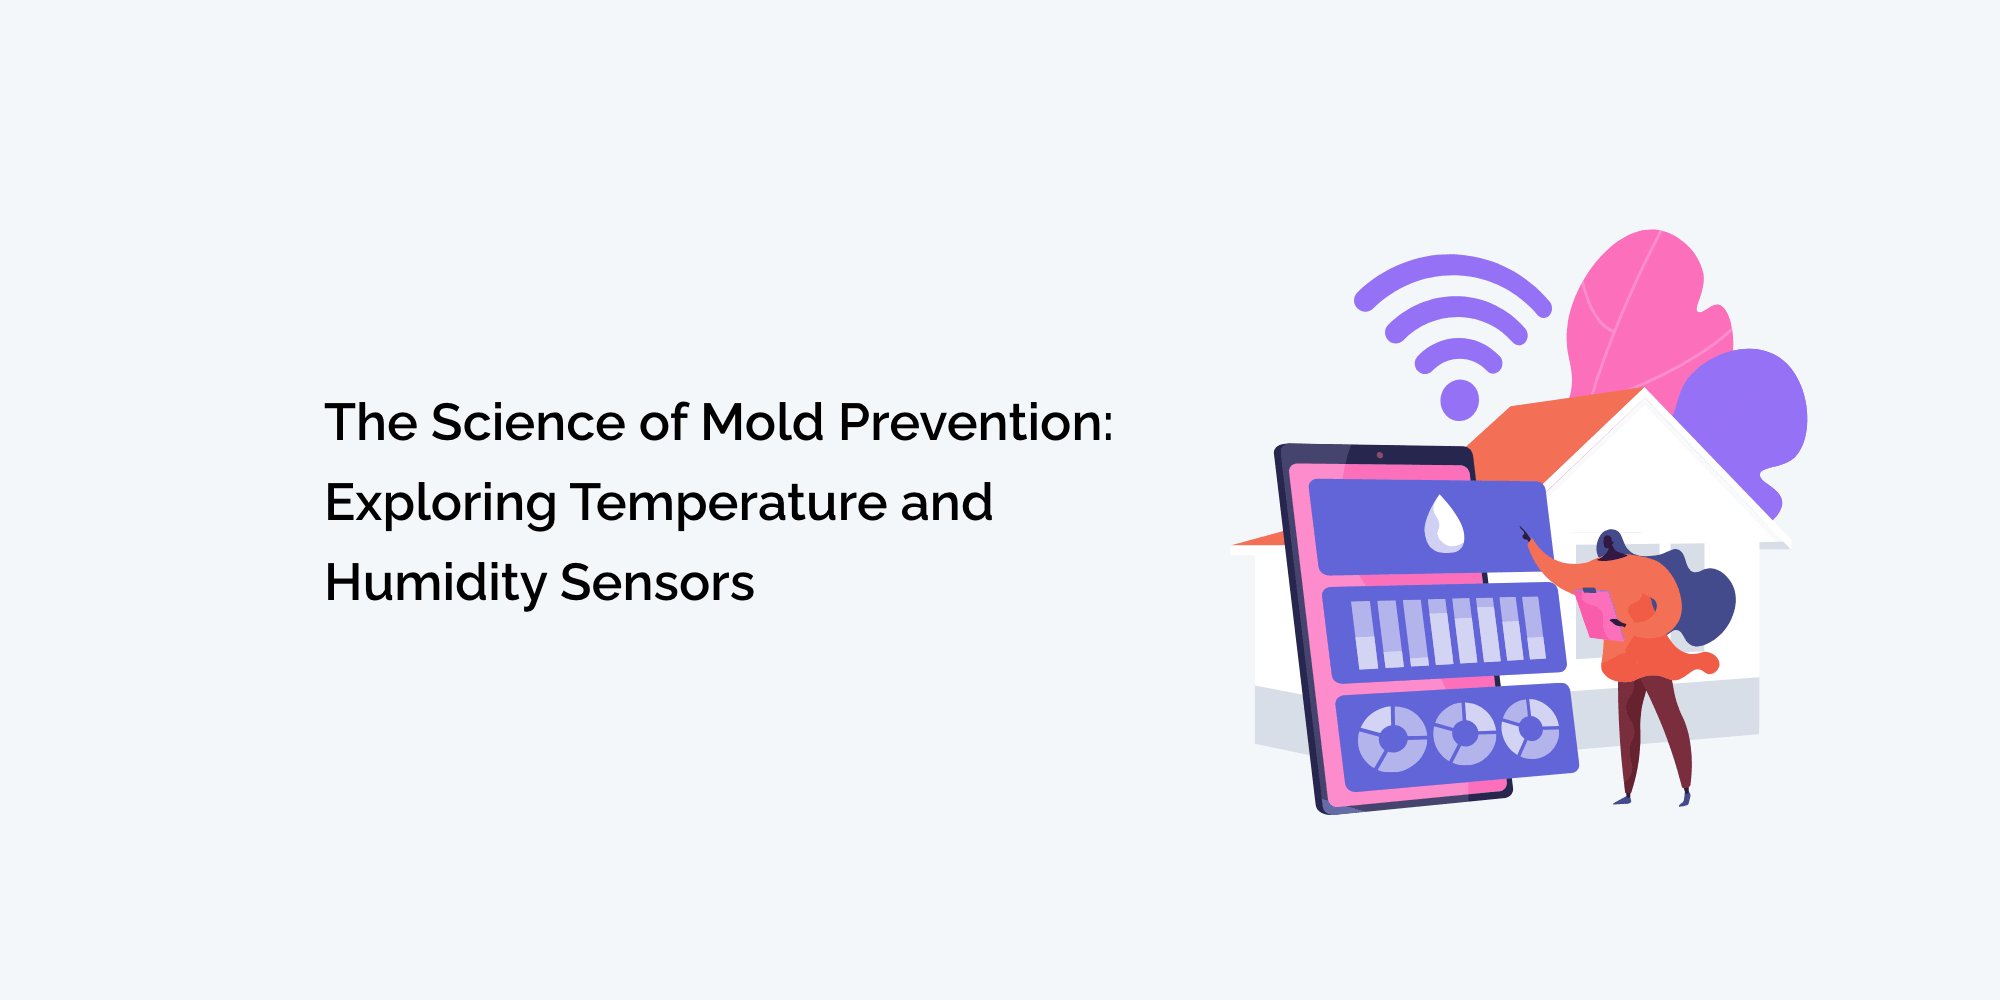 The Science of Mold Prevention: Exploring Temperature and Humidity Sensors